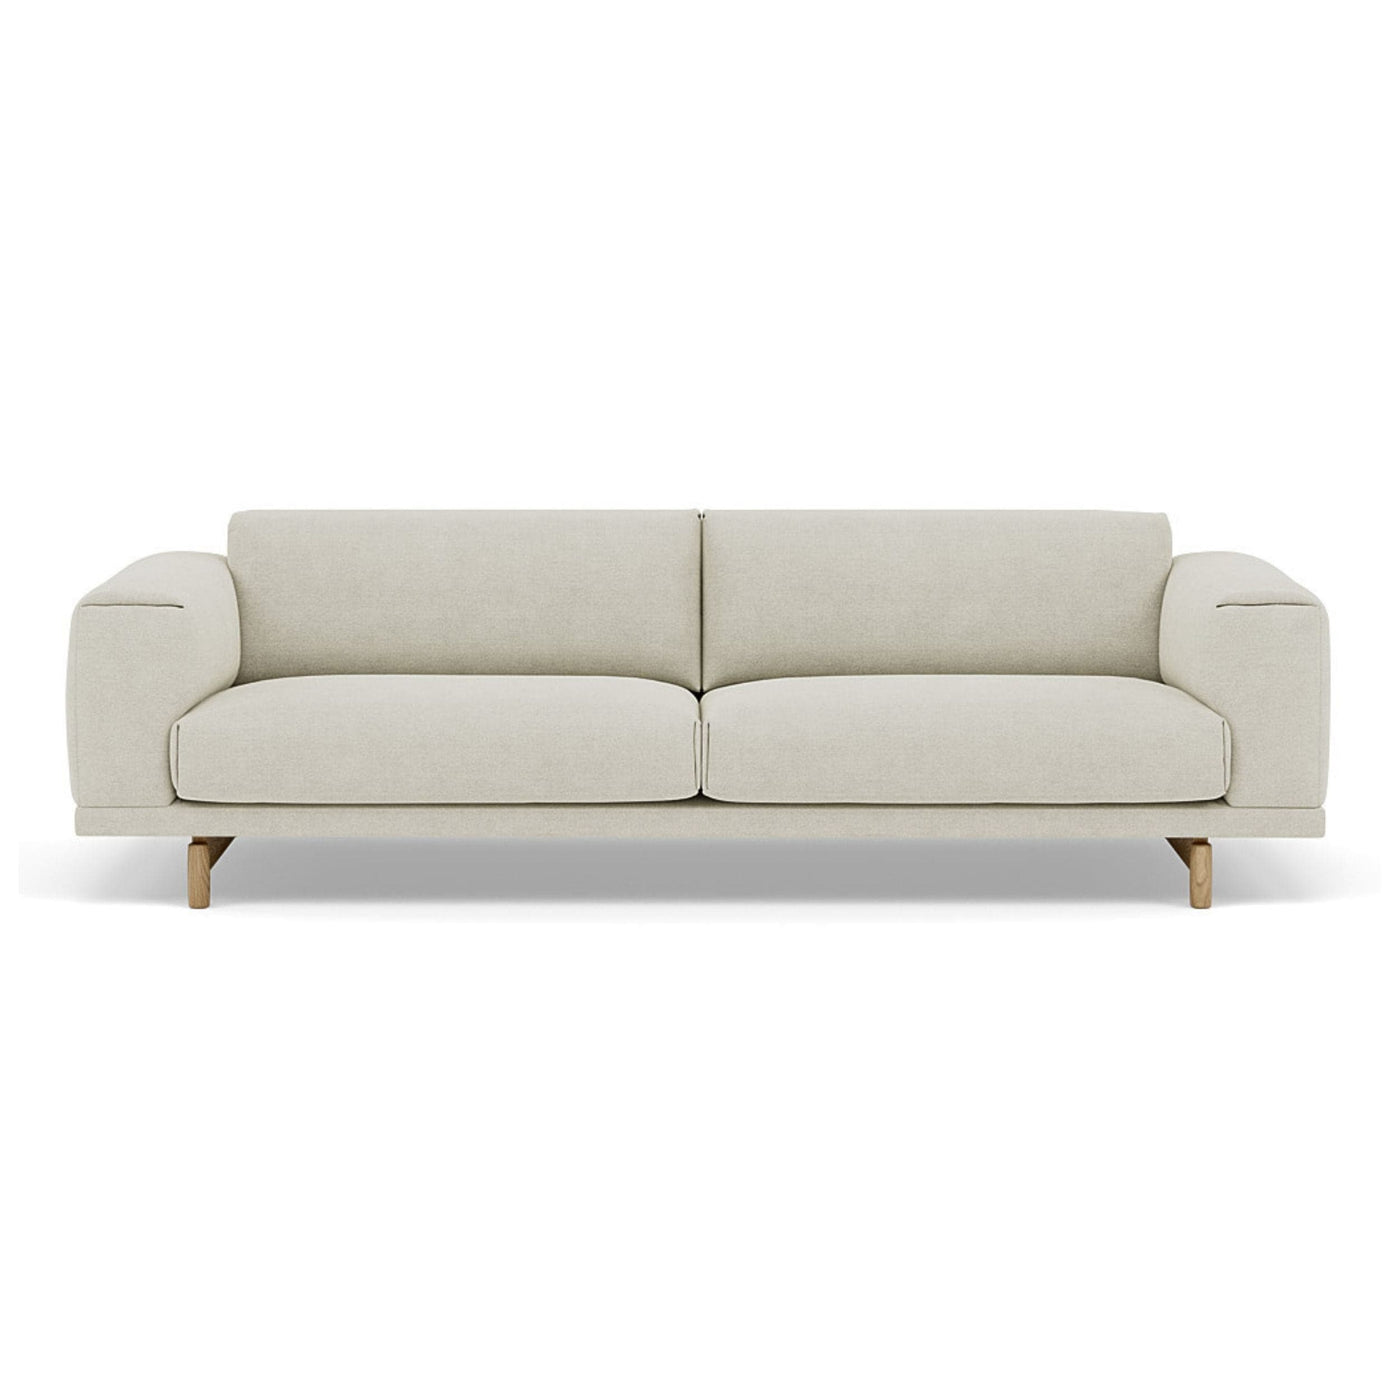 Muuto Rest Sofa Fiord 101 fabric. Made to order from someday designs. #colour_fiord-101